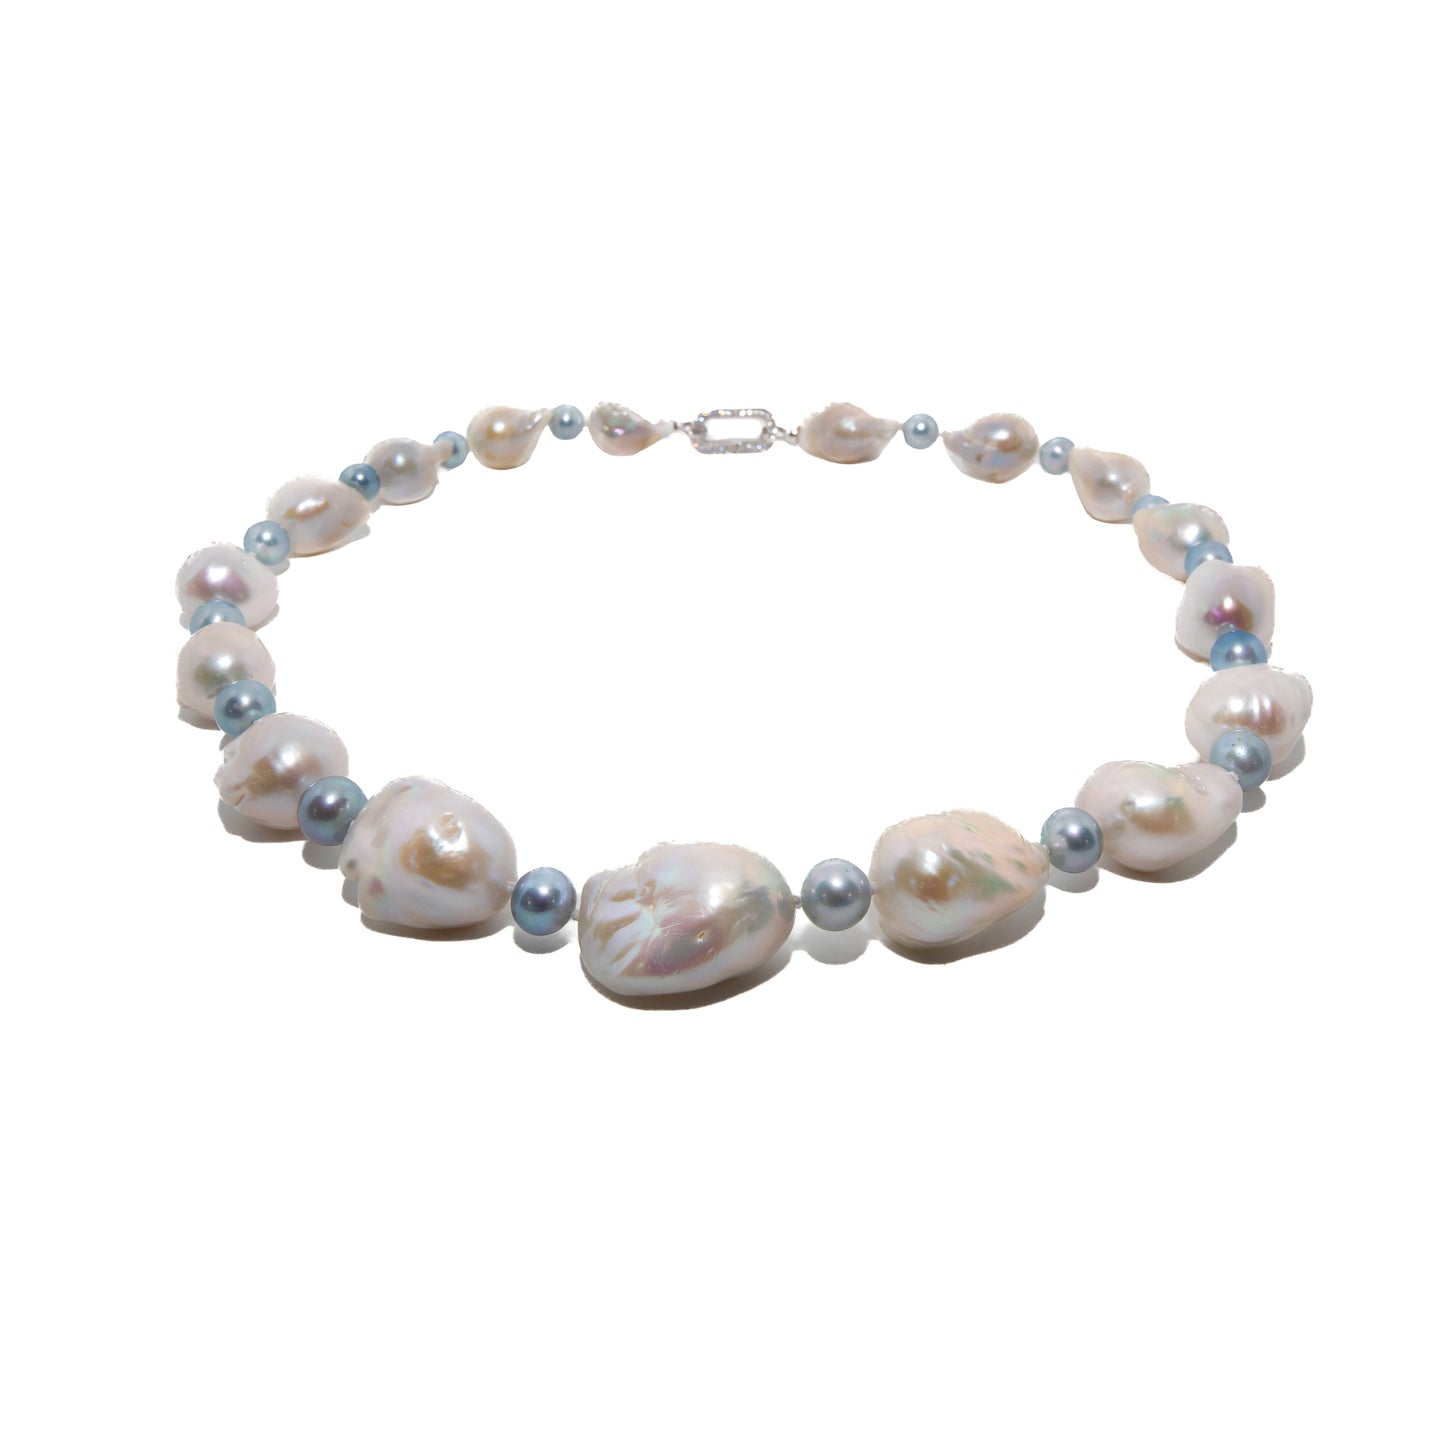 Botero Baroque Blue and White Pearls Necklace